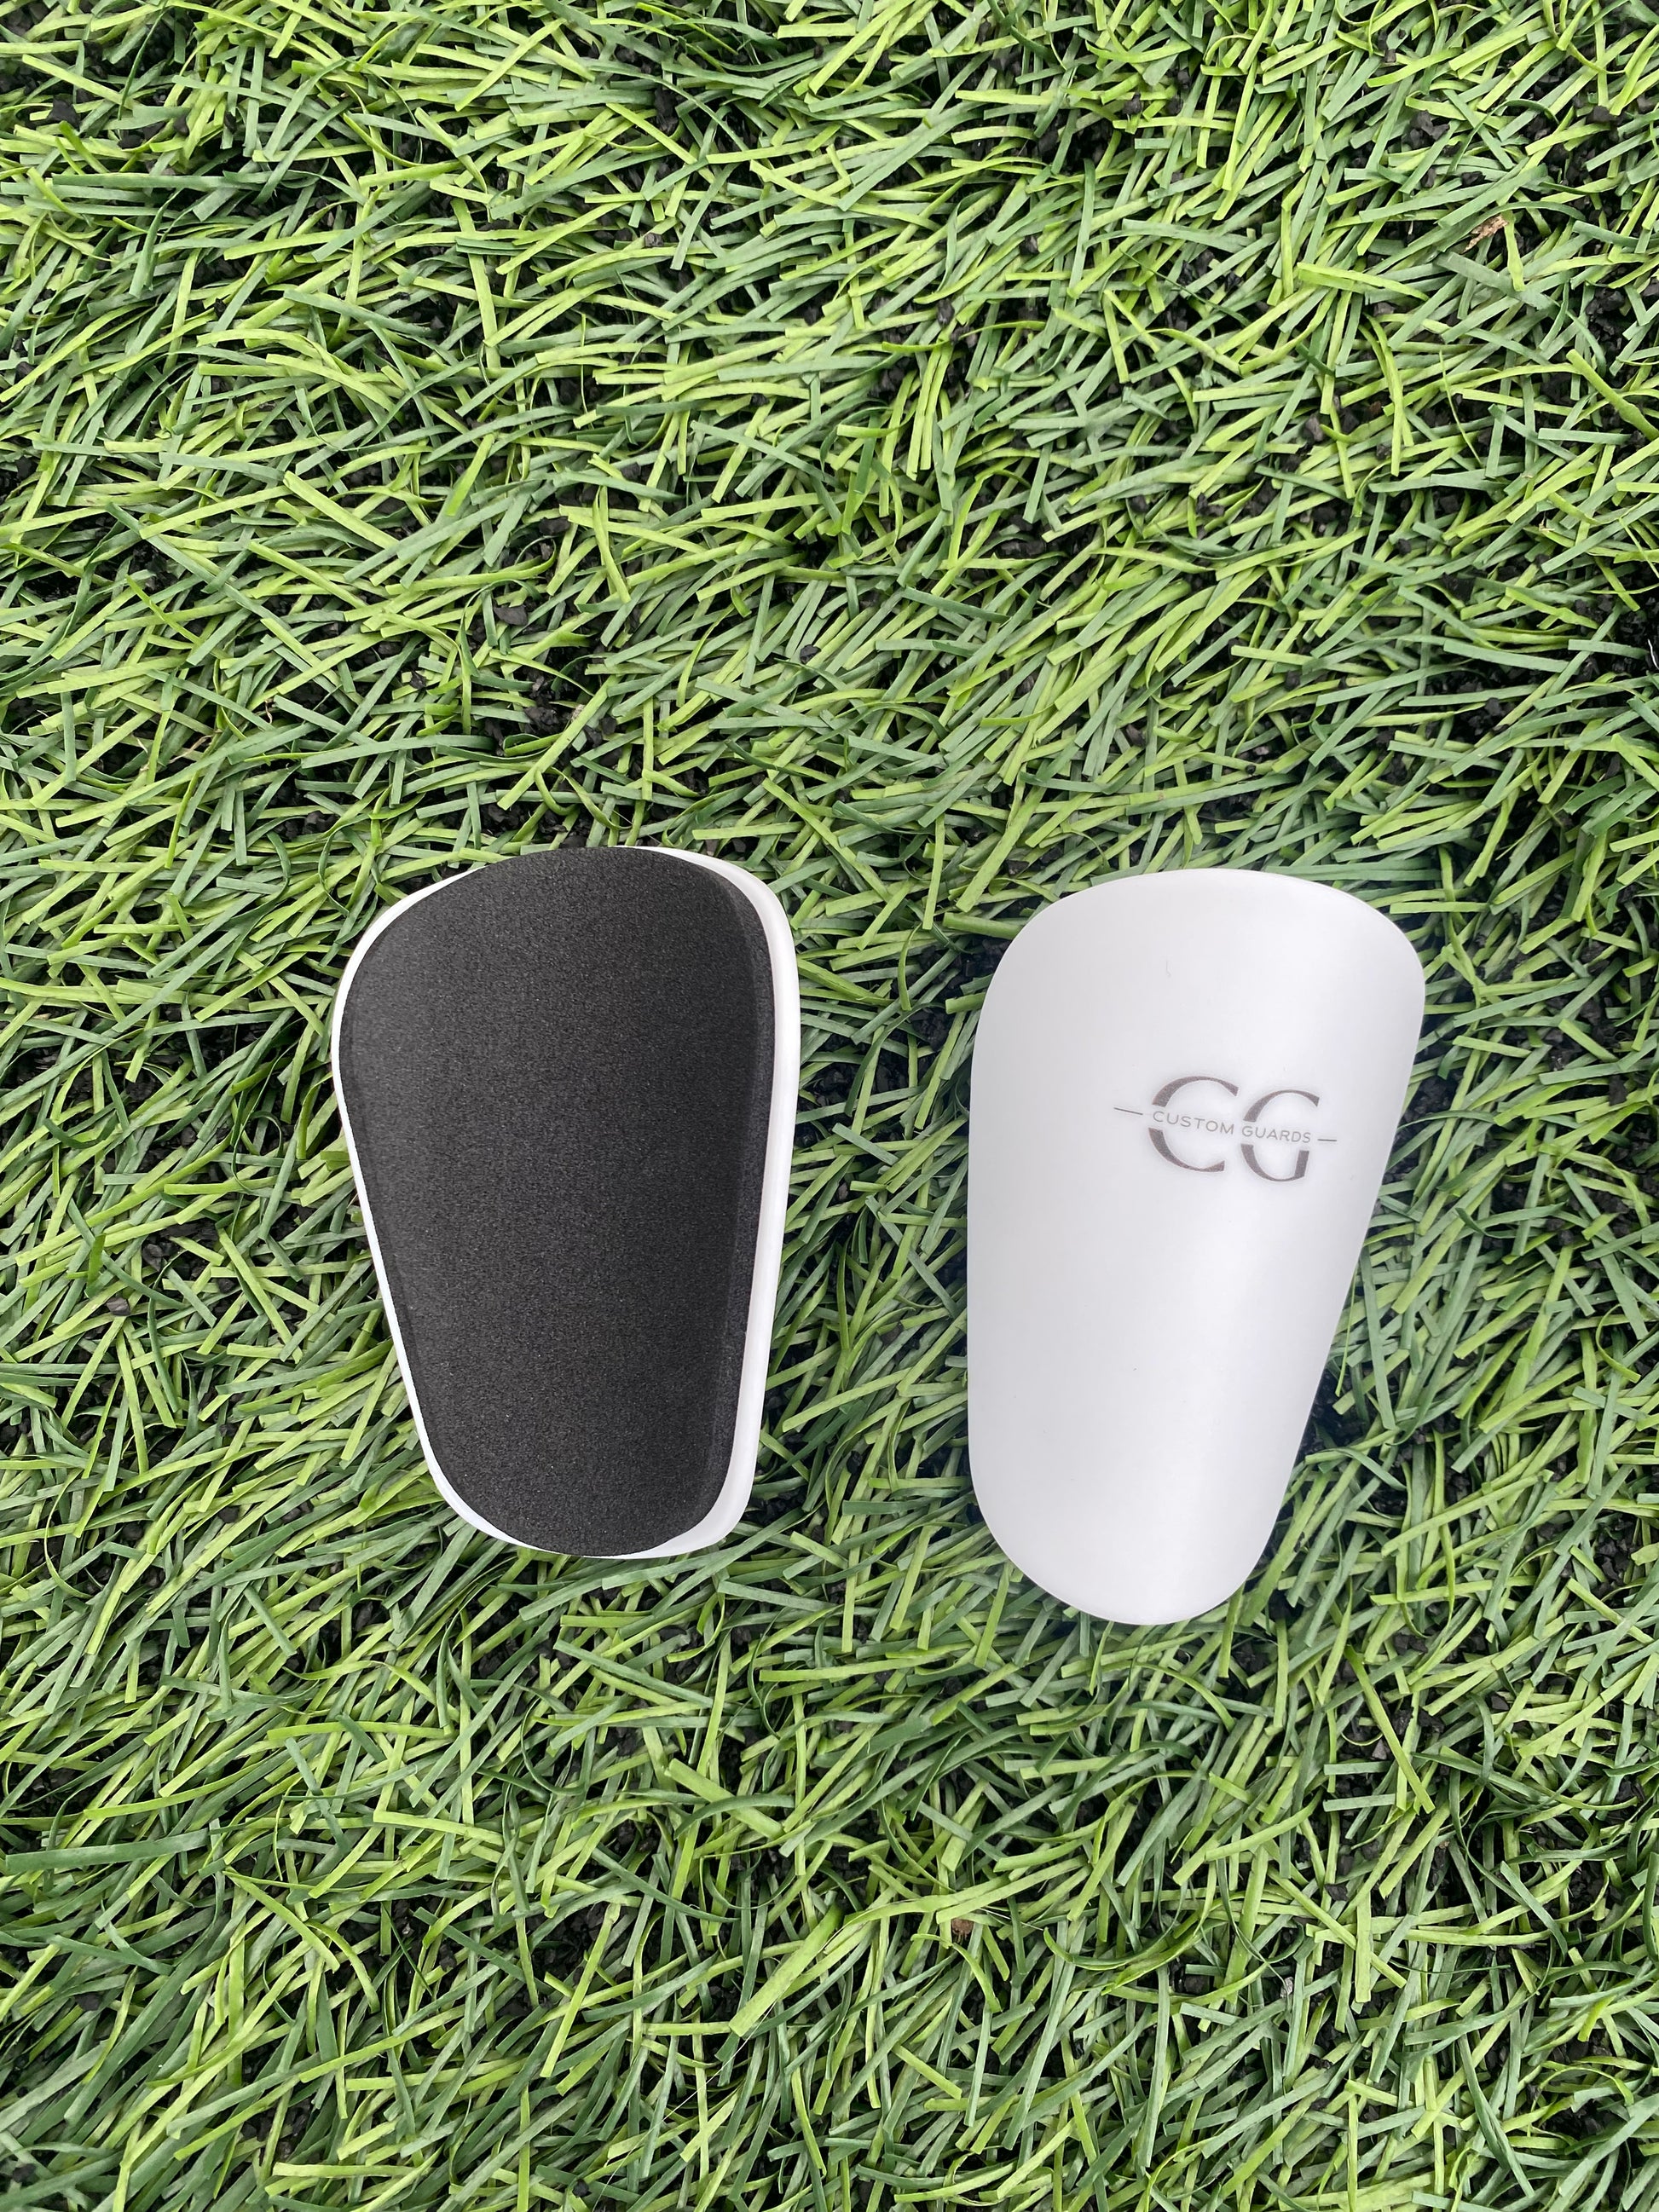 Big on protection, small in size – JOGA Mini Shin Pads have got you co